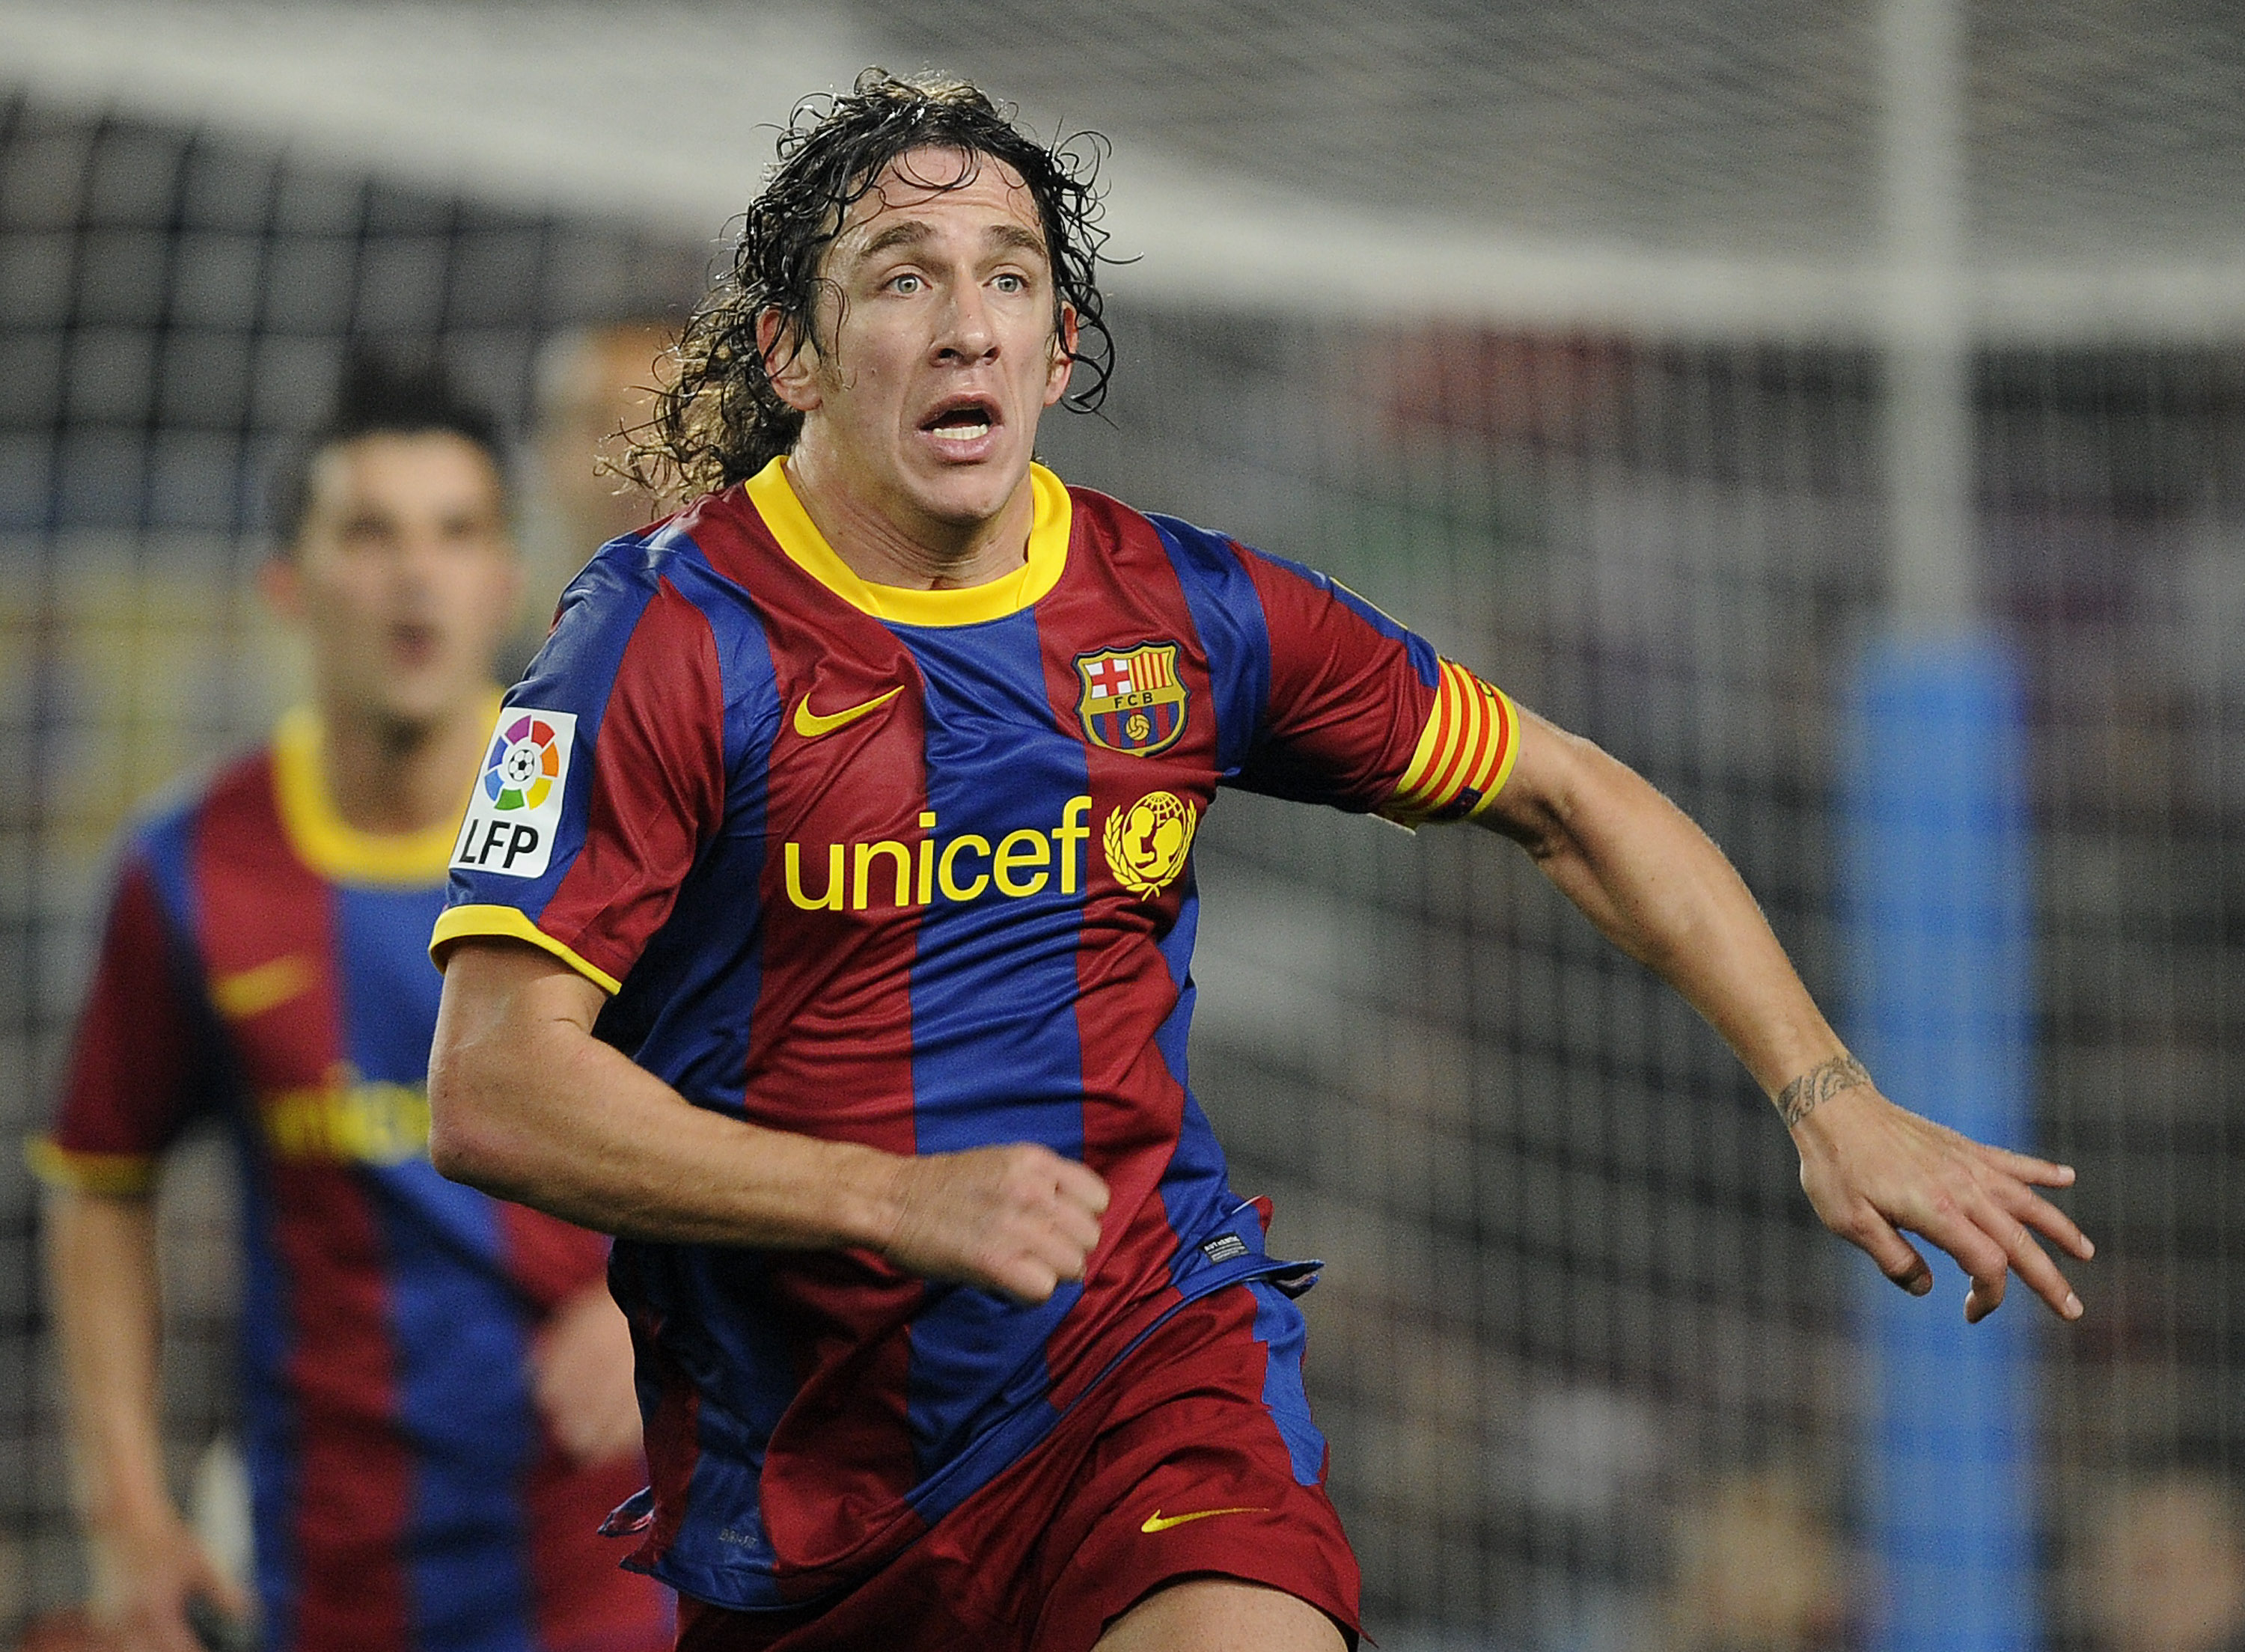 Left? Right? Center? No politics here, Puyi can do it all!